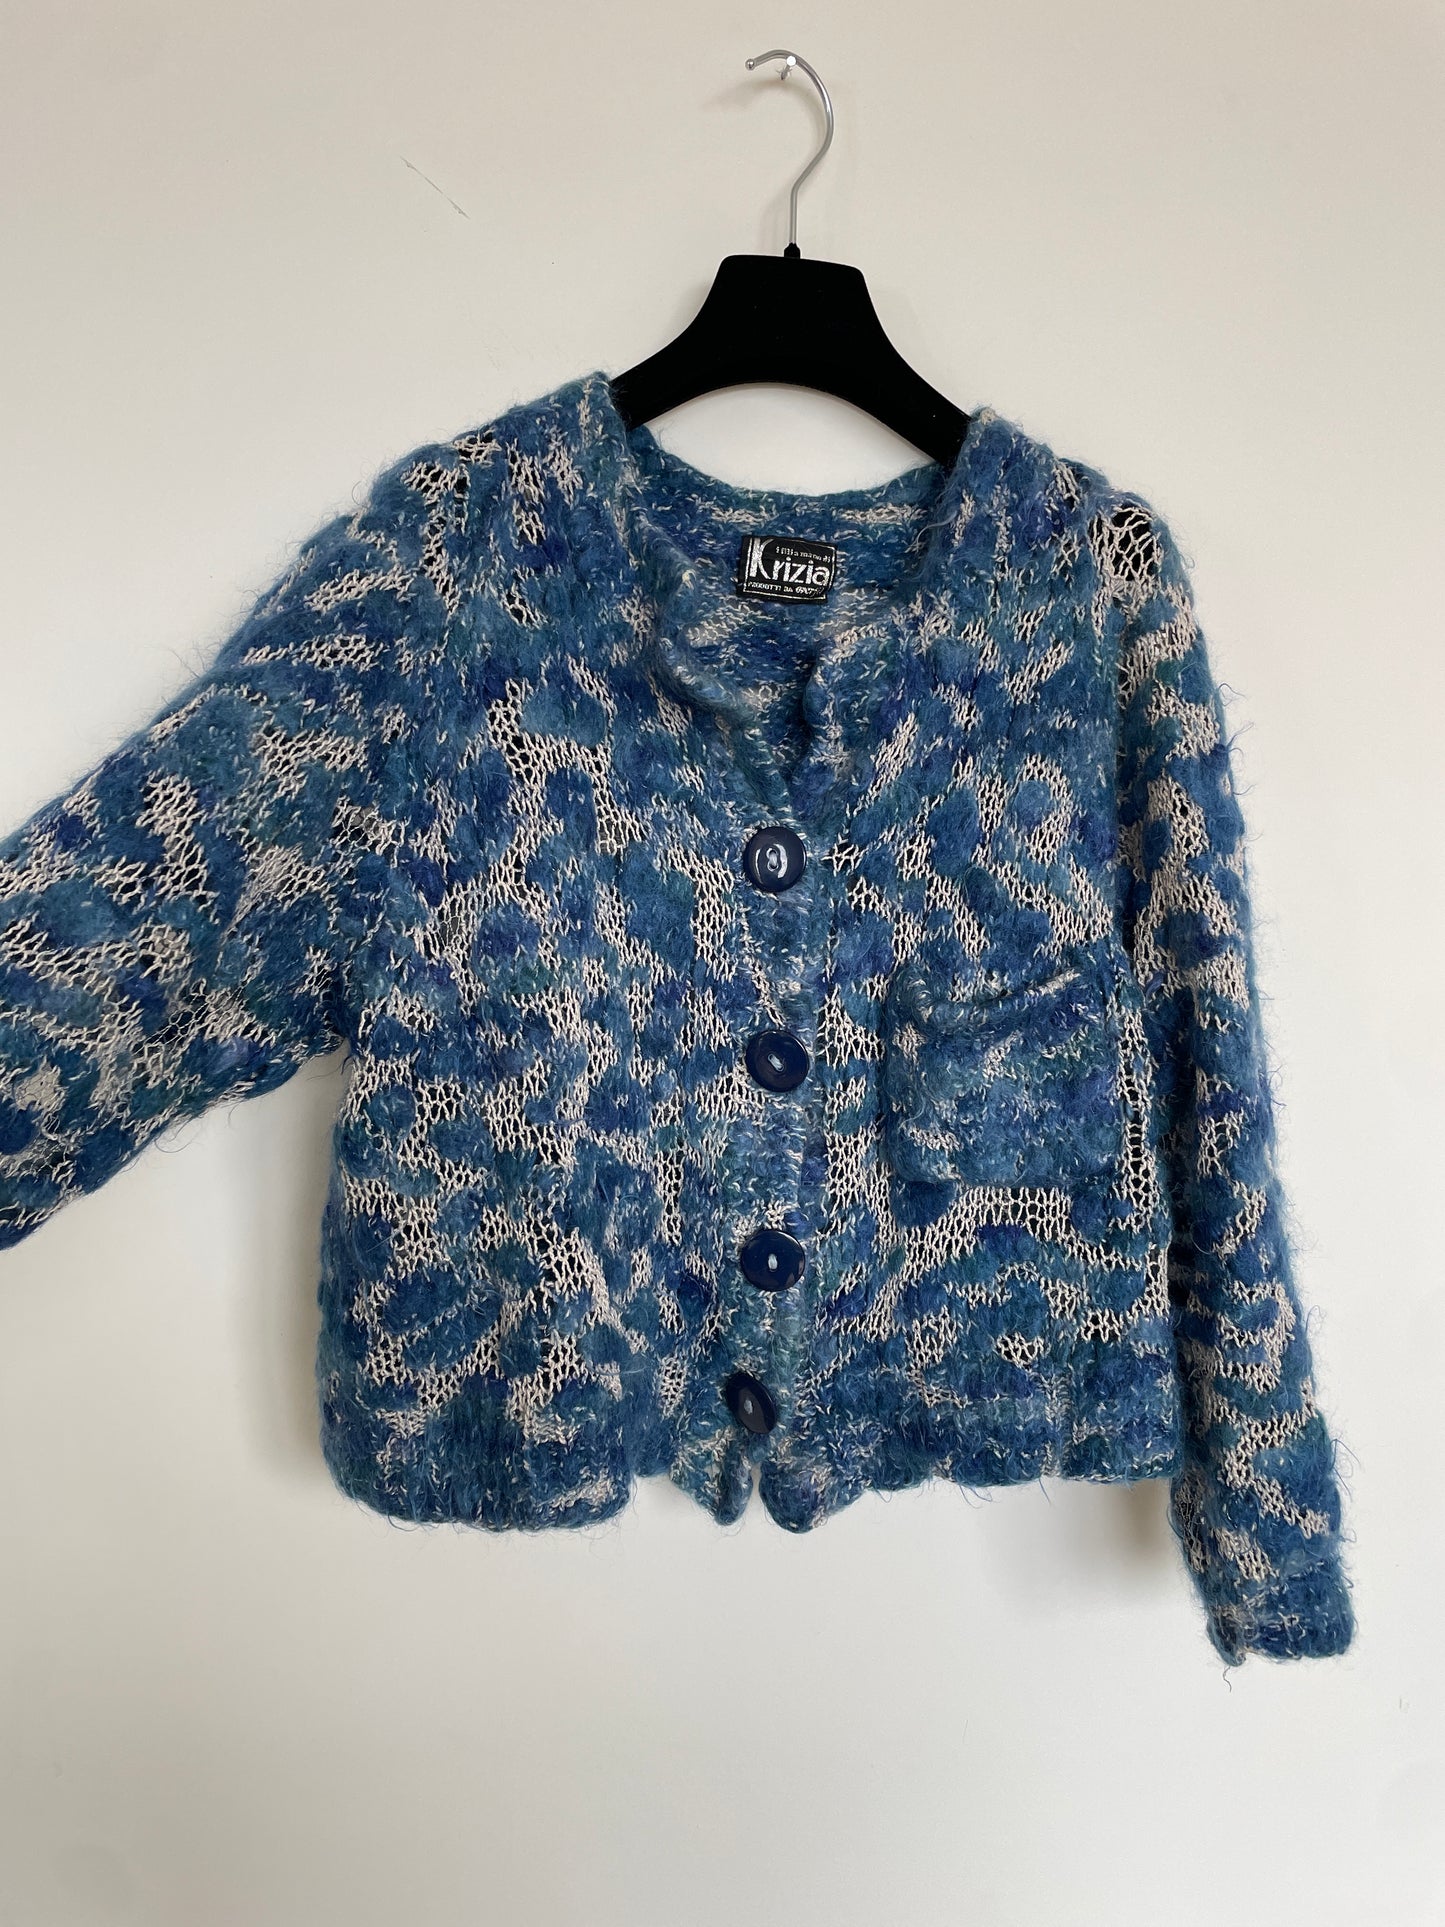 Krizia 80's loosely knit blue cardigan with wool patches